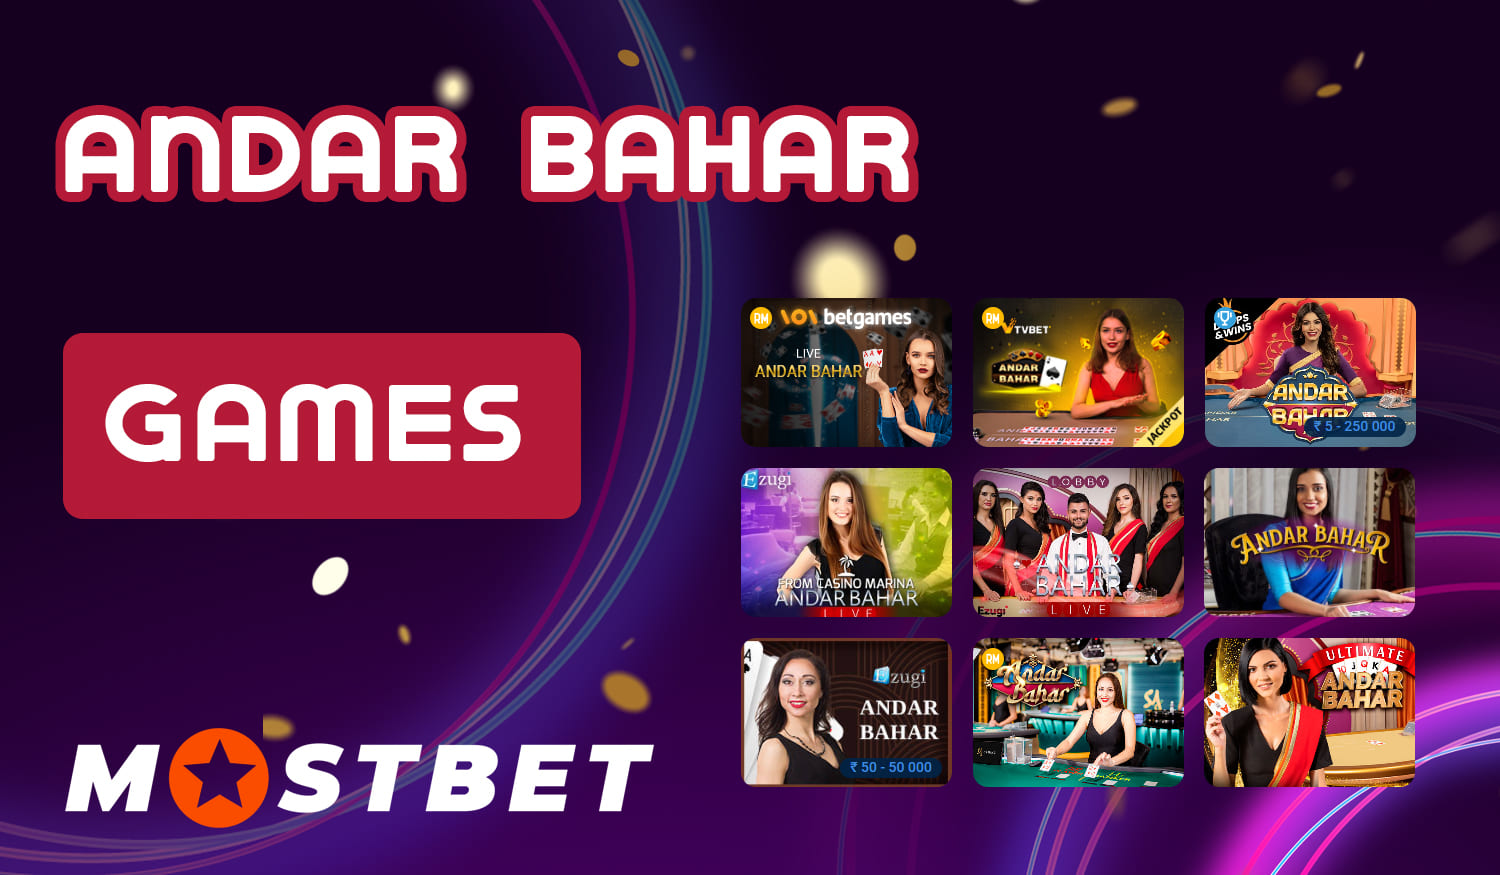 Which Andar Bahar games are available to Indian users on Mostbet